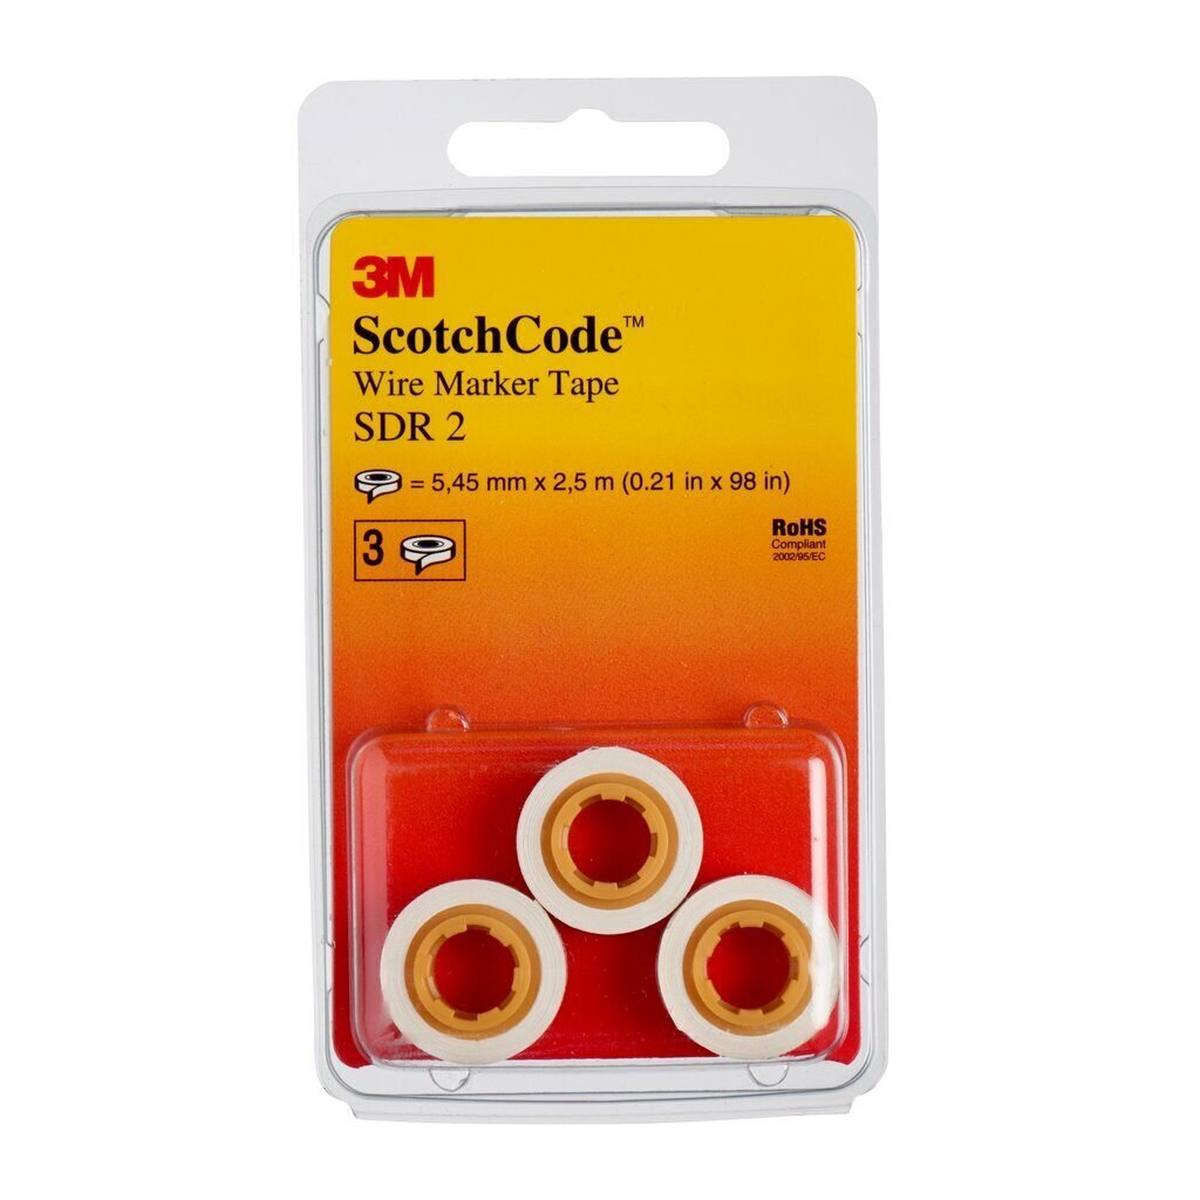 3M ScotchCode SDR-2 cable marker refill rolls, number 2, pack of 3